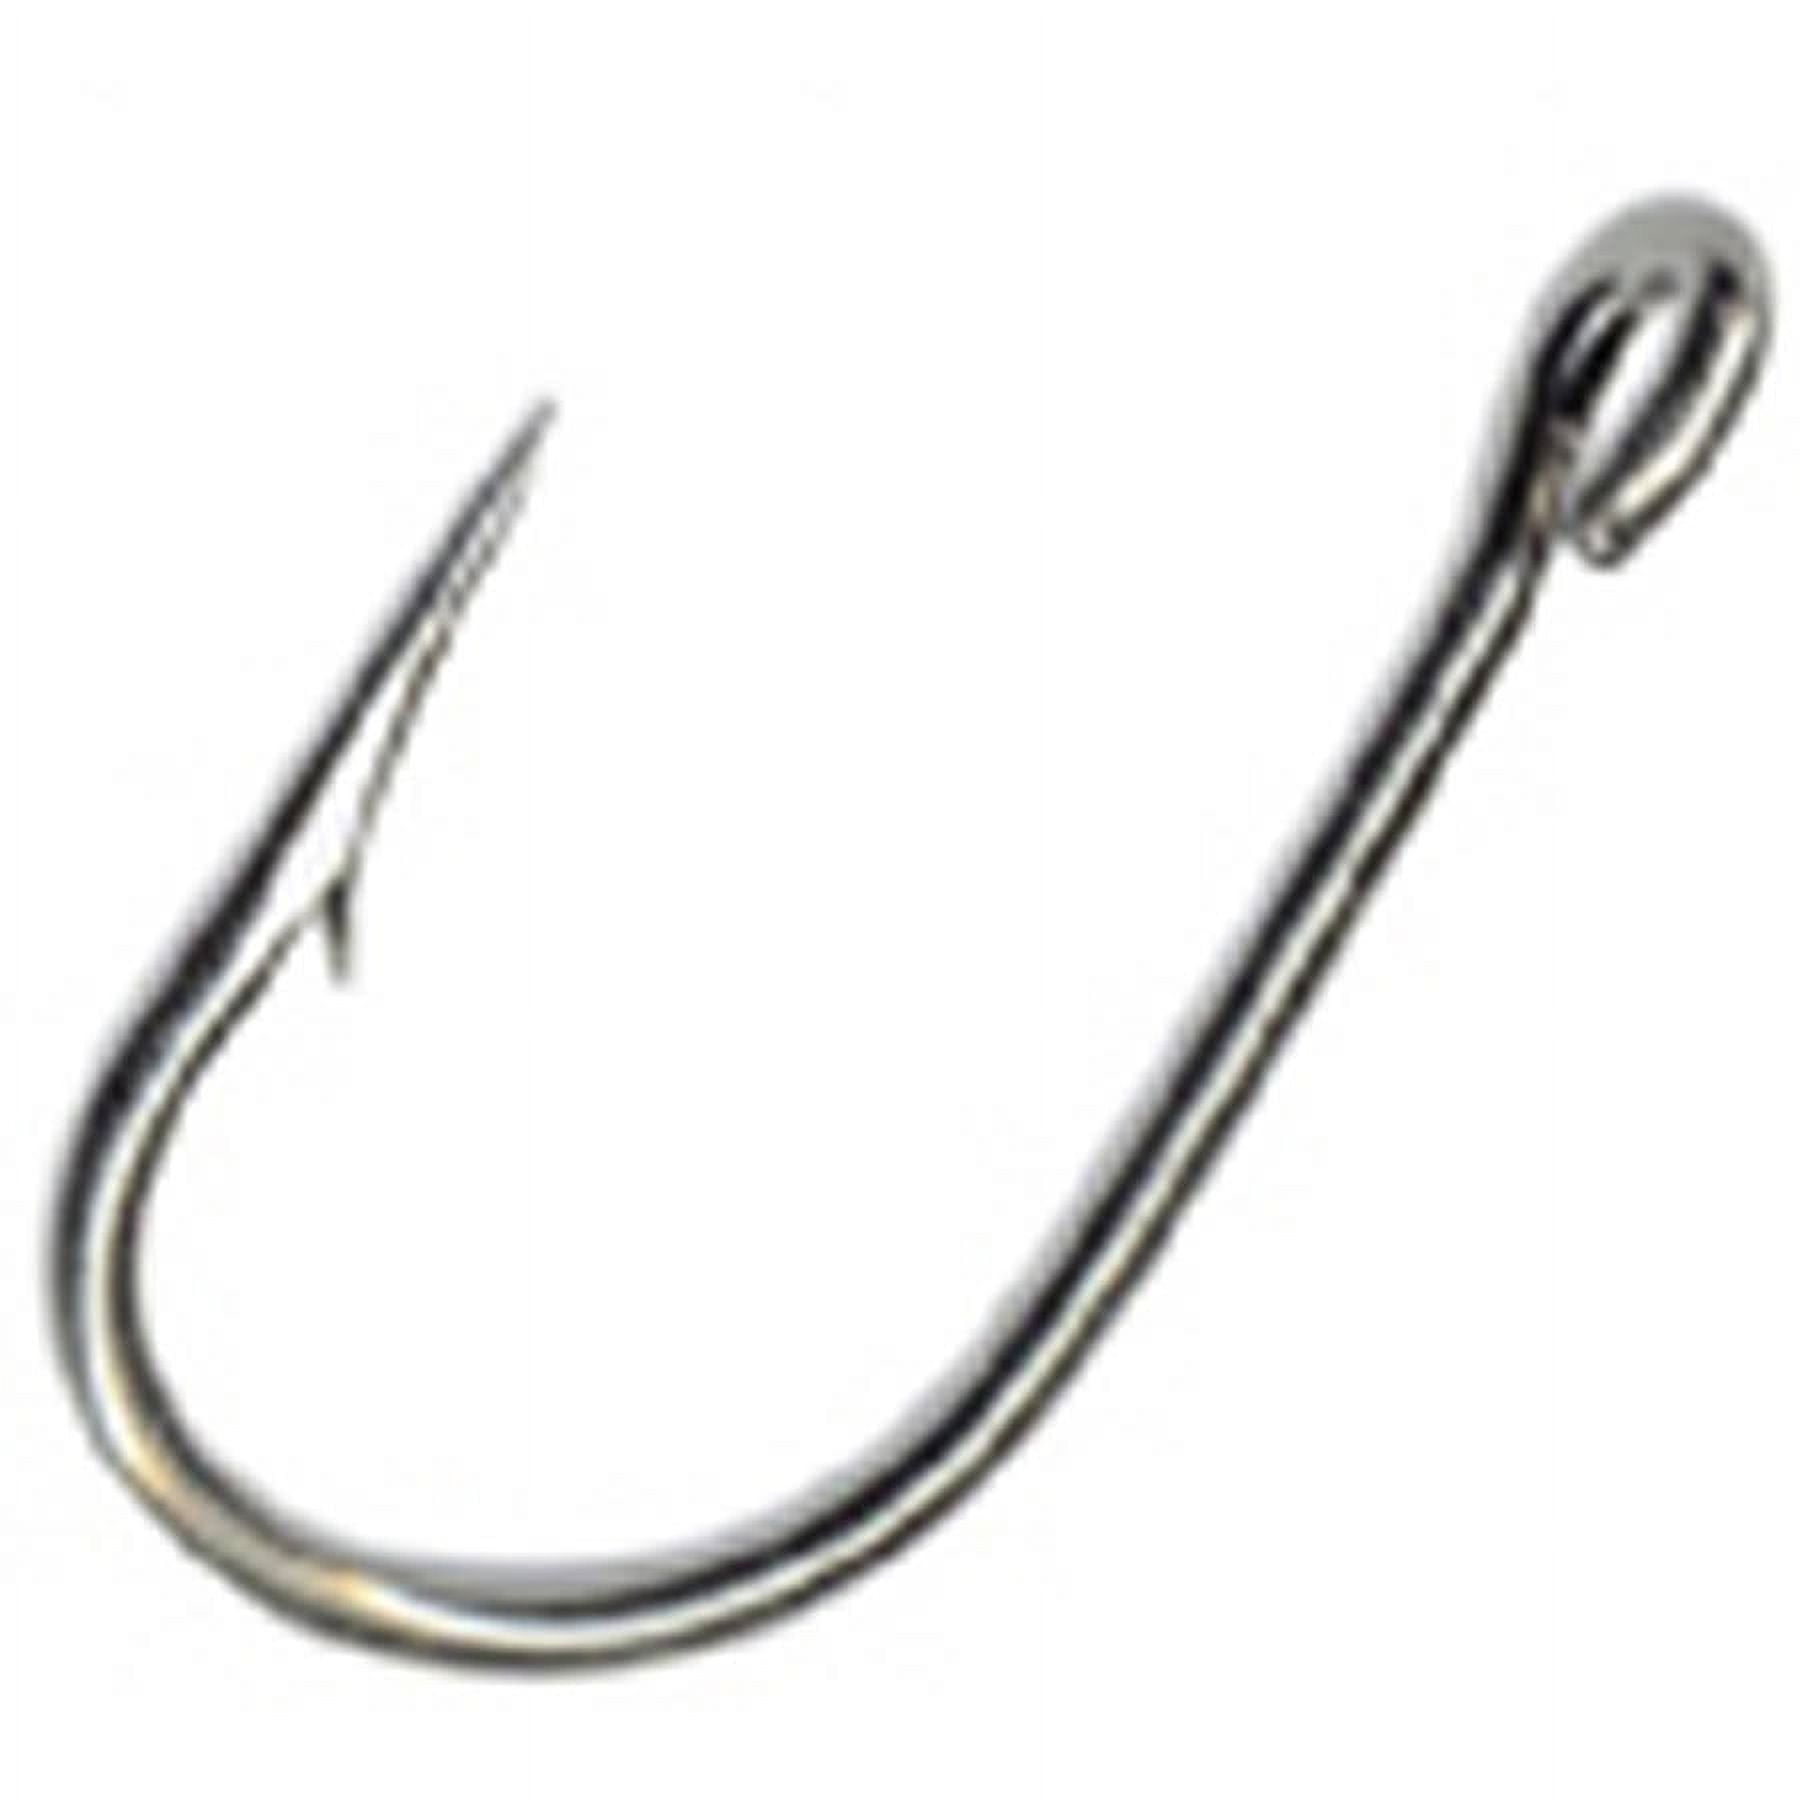 Stellar Circle Hooks 5/0 (25 Pack) UltraPoint Wide Gap Offset Extra Fine  Wire Hook, for Catfish, Carp, Bluegill to Tuna, Saltwater or Freshwater Fishing  Hooks